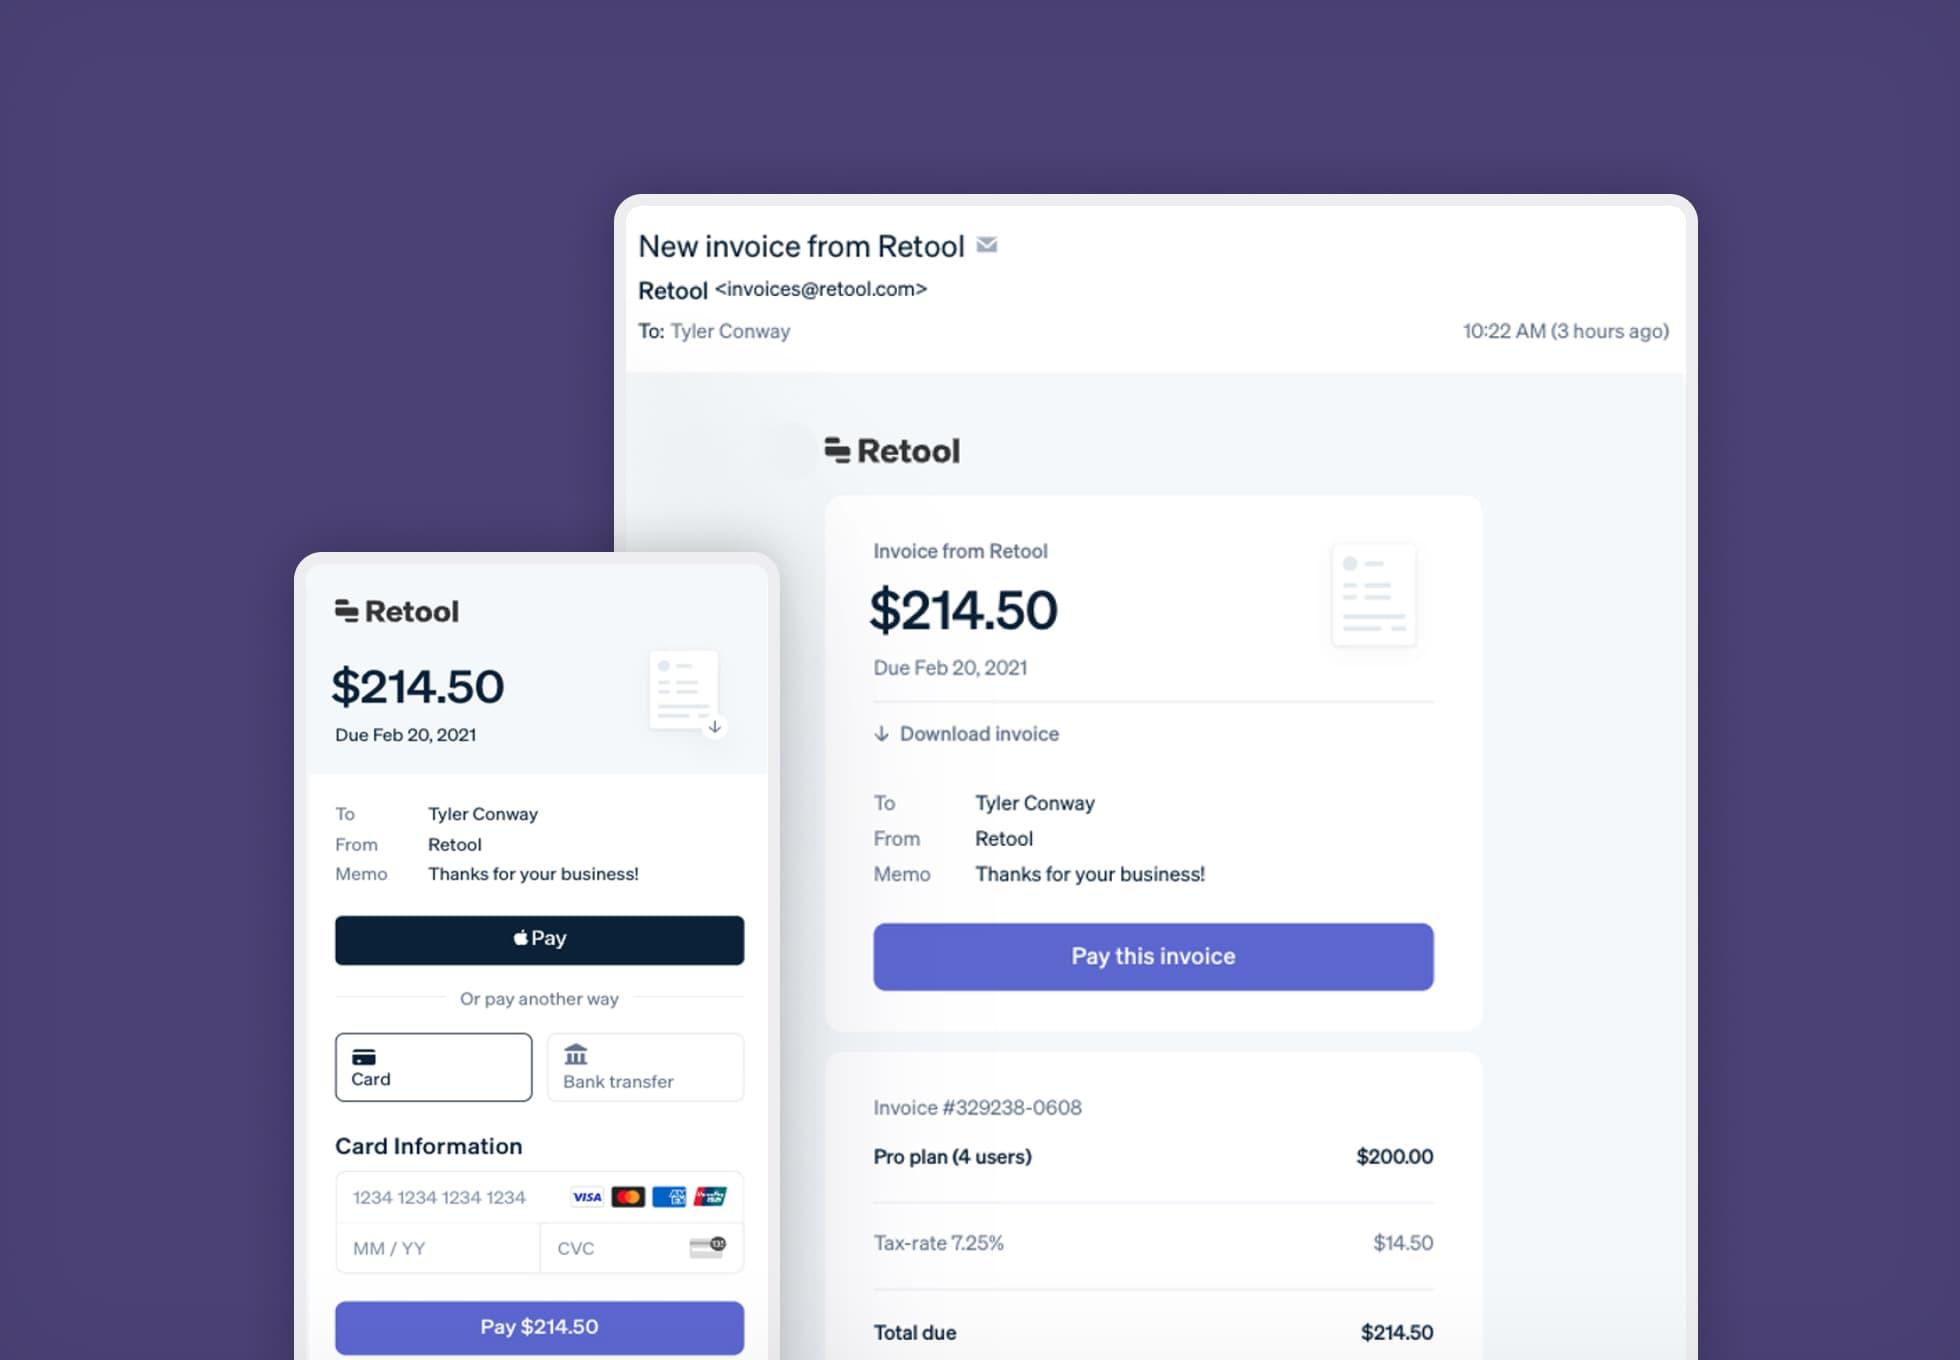 Screenshots of Stripe checkouts that display an invoice and the credit card processing screen.